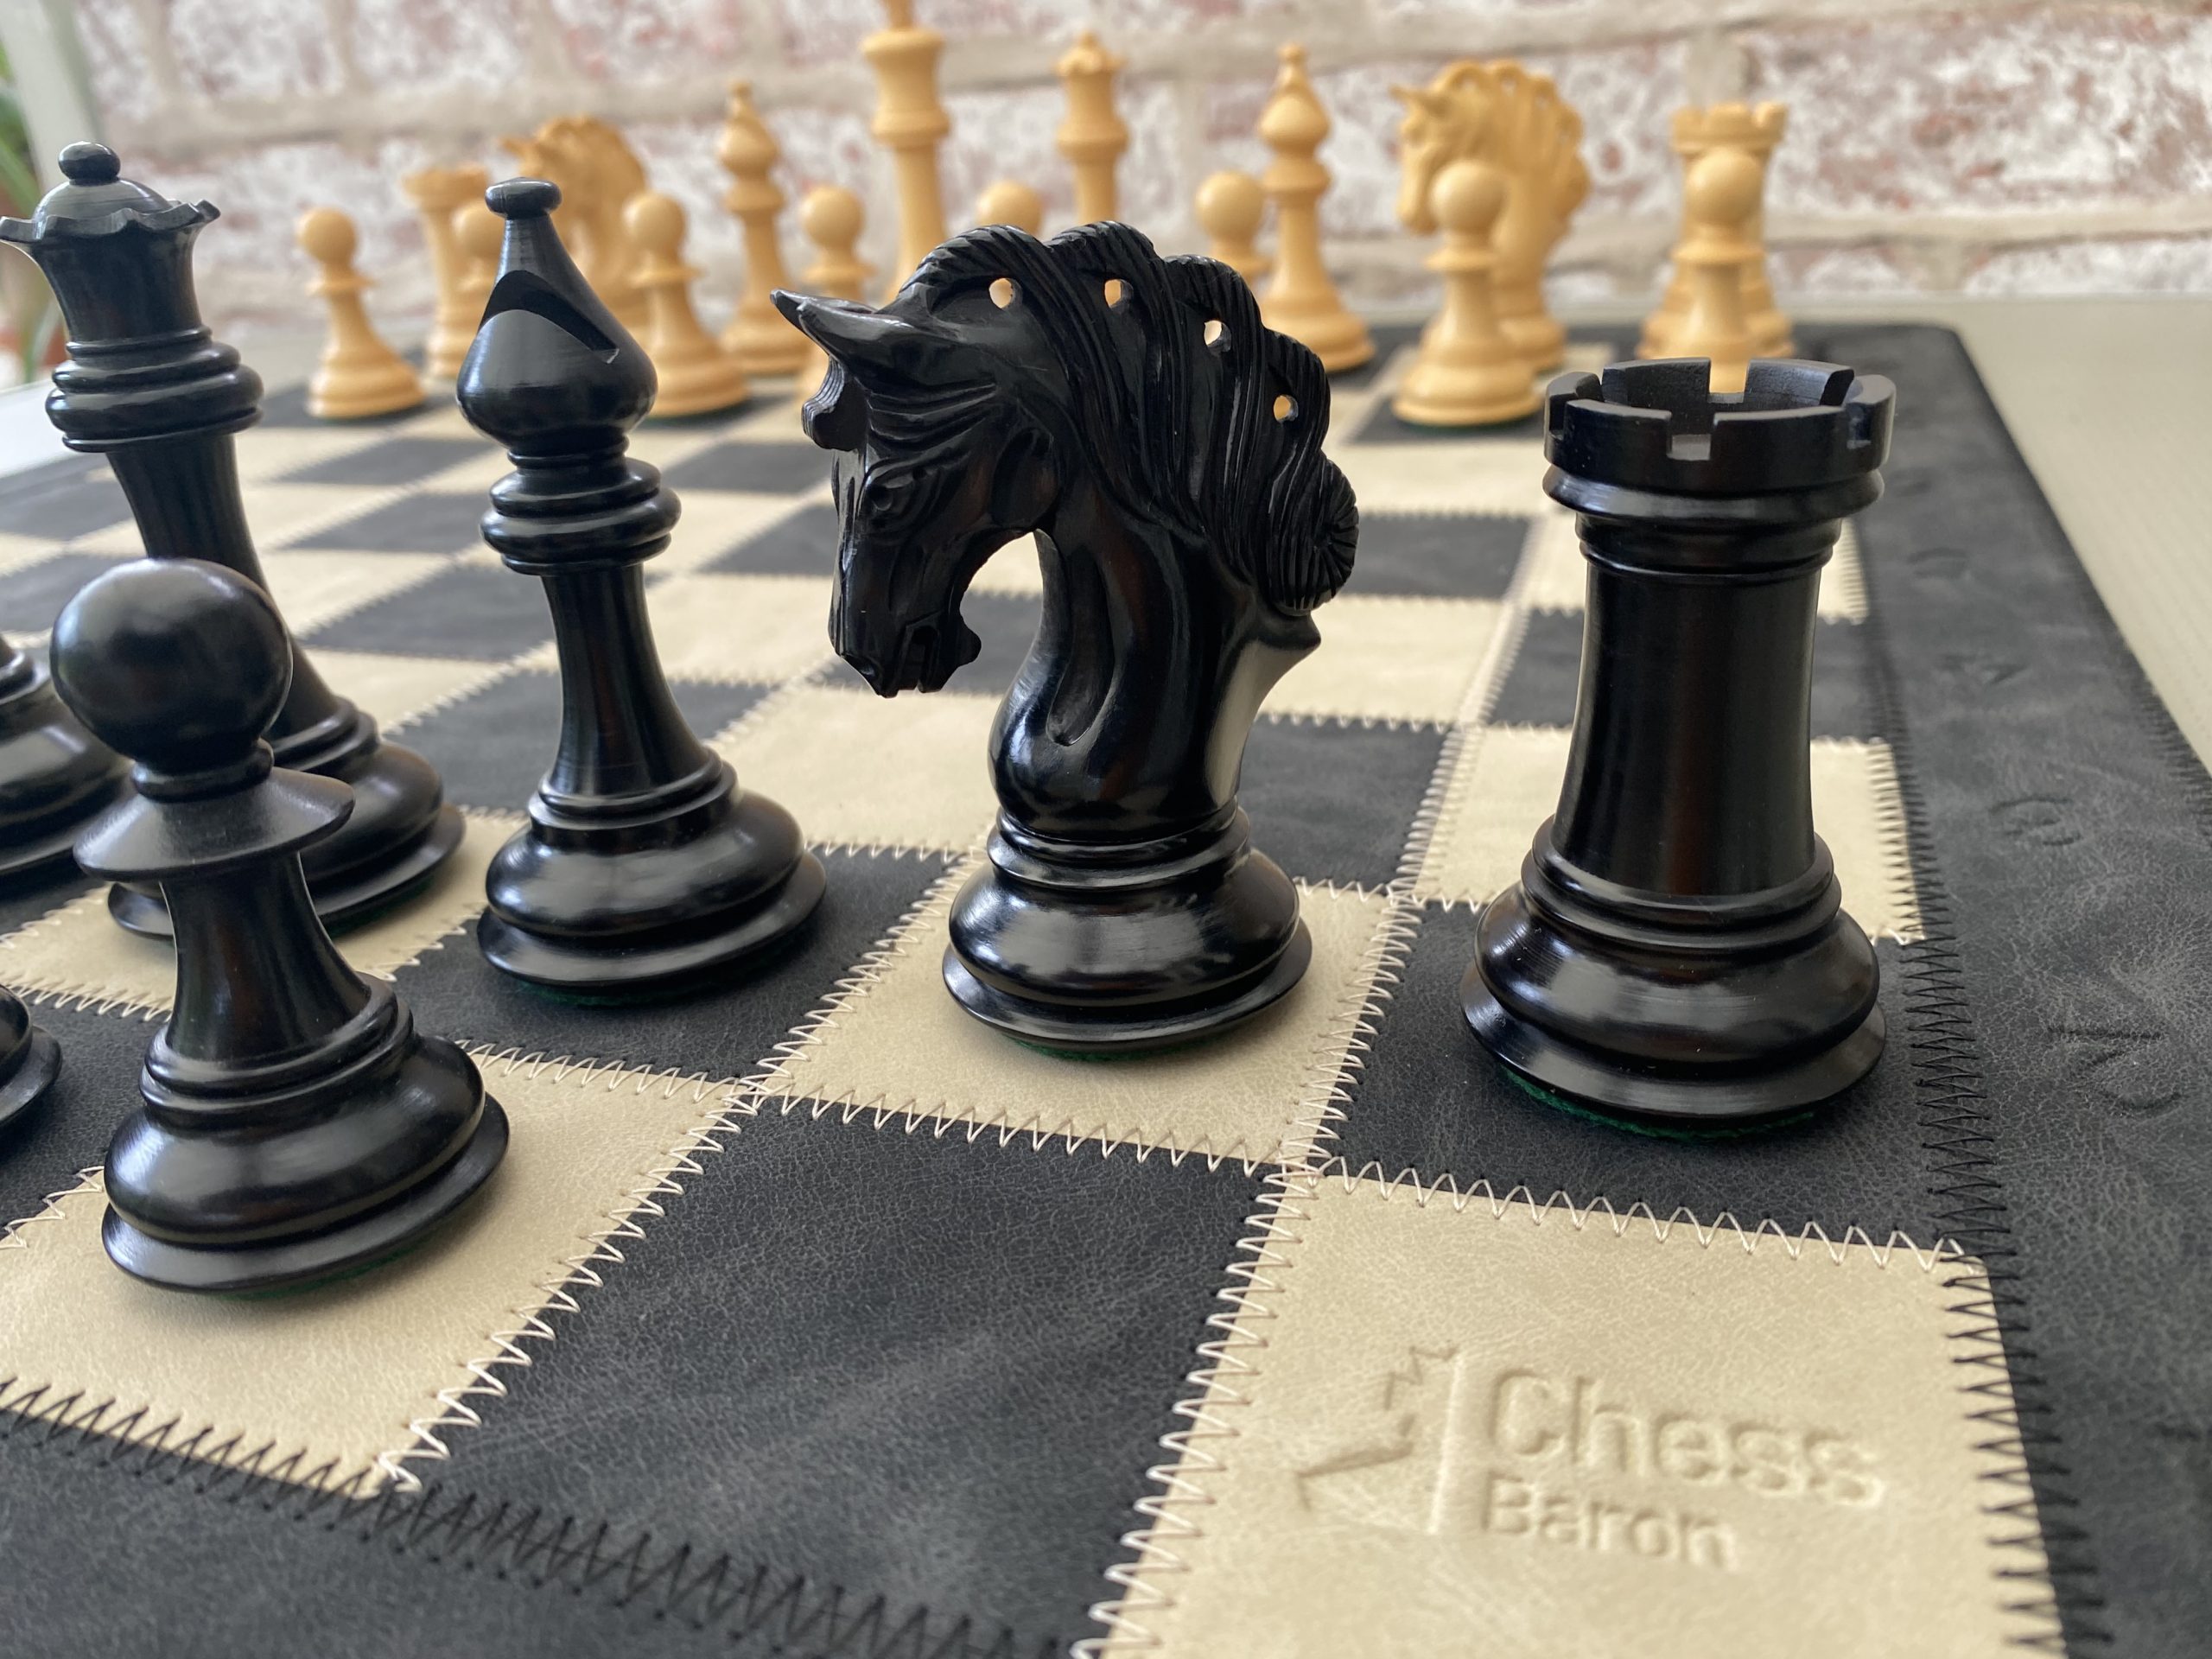 Leather Chess Mat 2.25 Squares - ChessBaron Chess Sets USA - Call (213)  325 6540